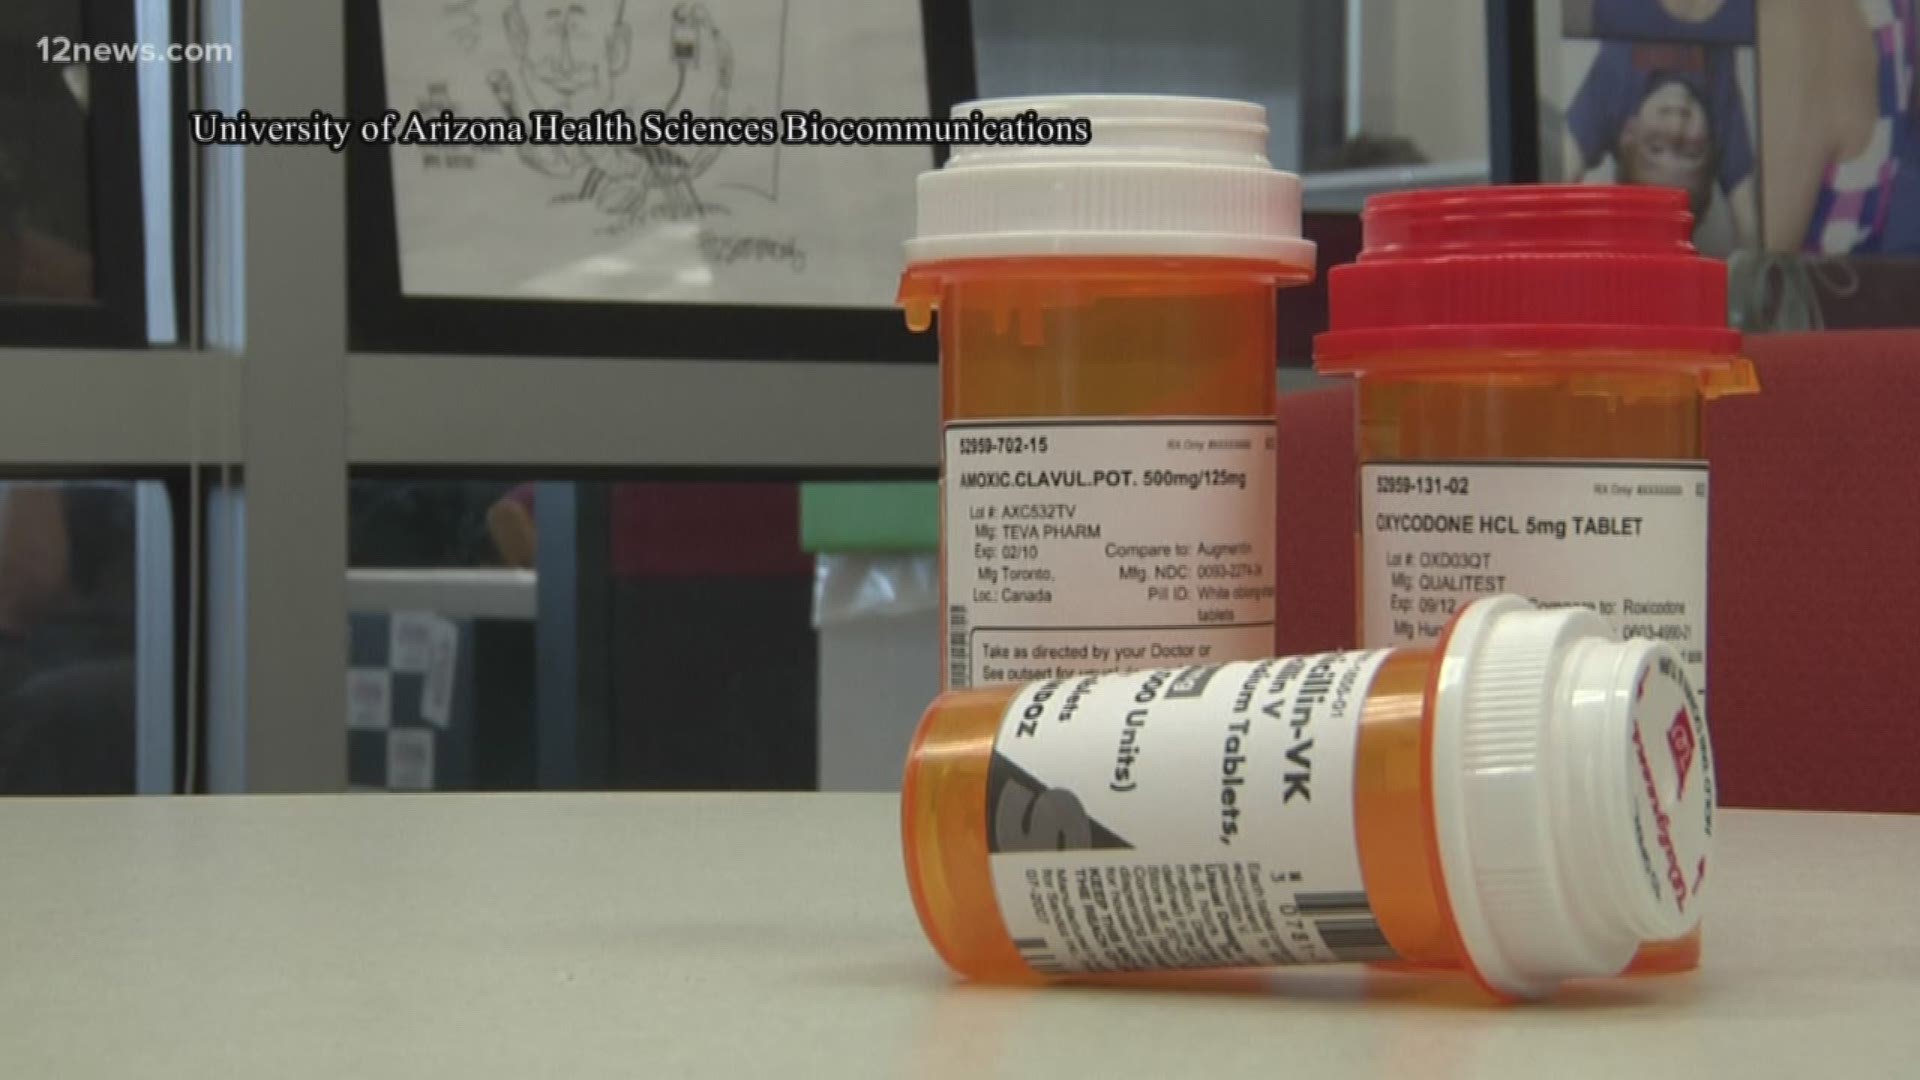 The University of Arizona has started a helpline where people struggling with opioid addiction can call in for guidance from pharmacists, nurses and physicians. So far they have received about 700 calls.